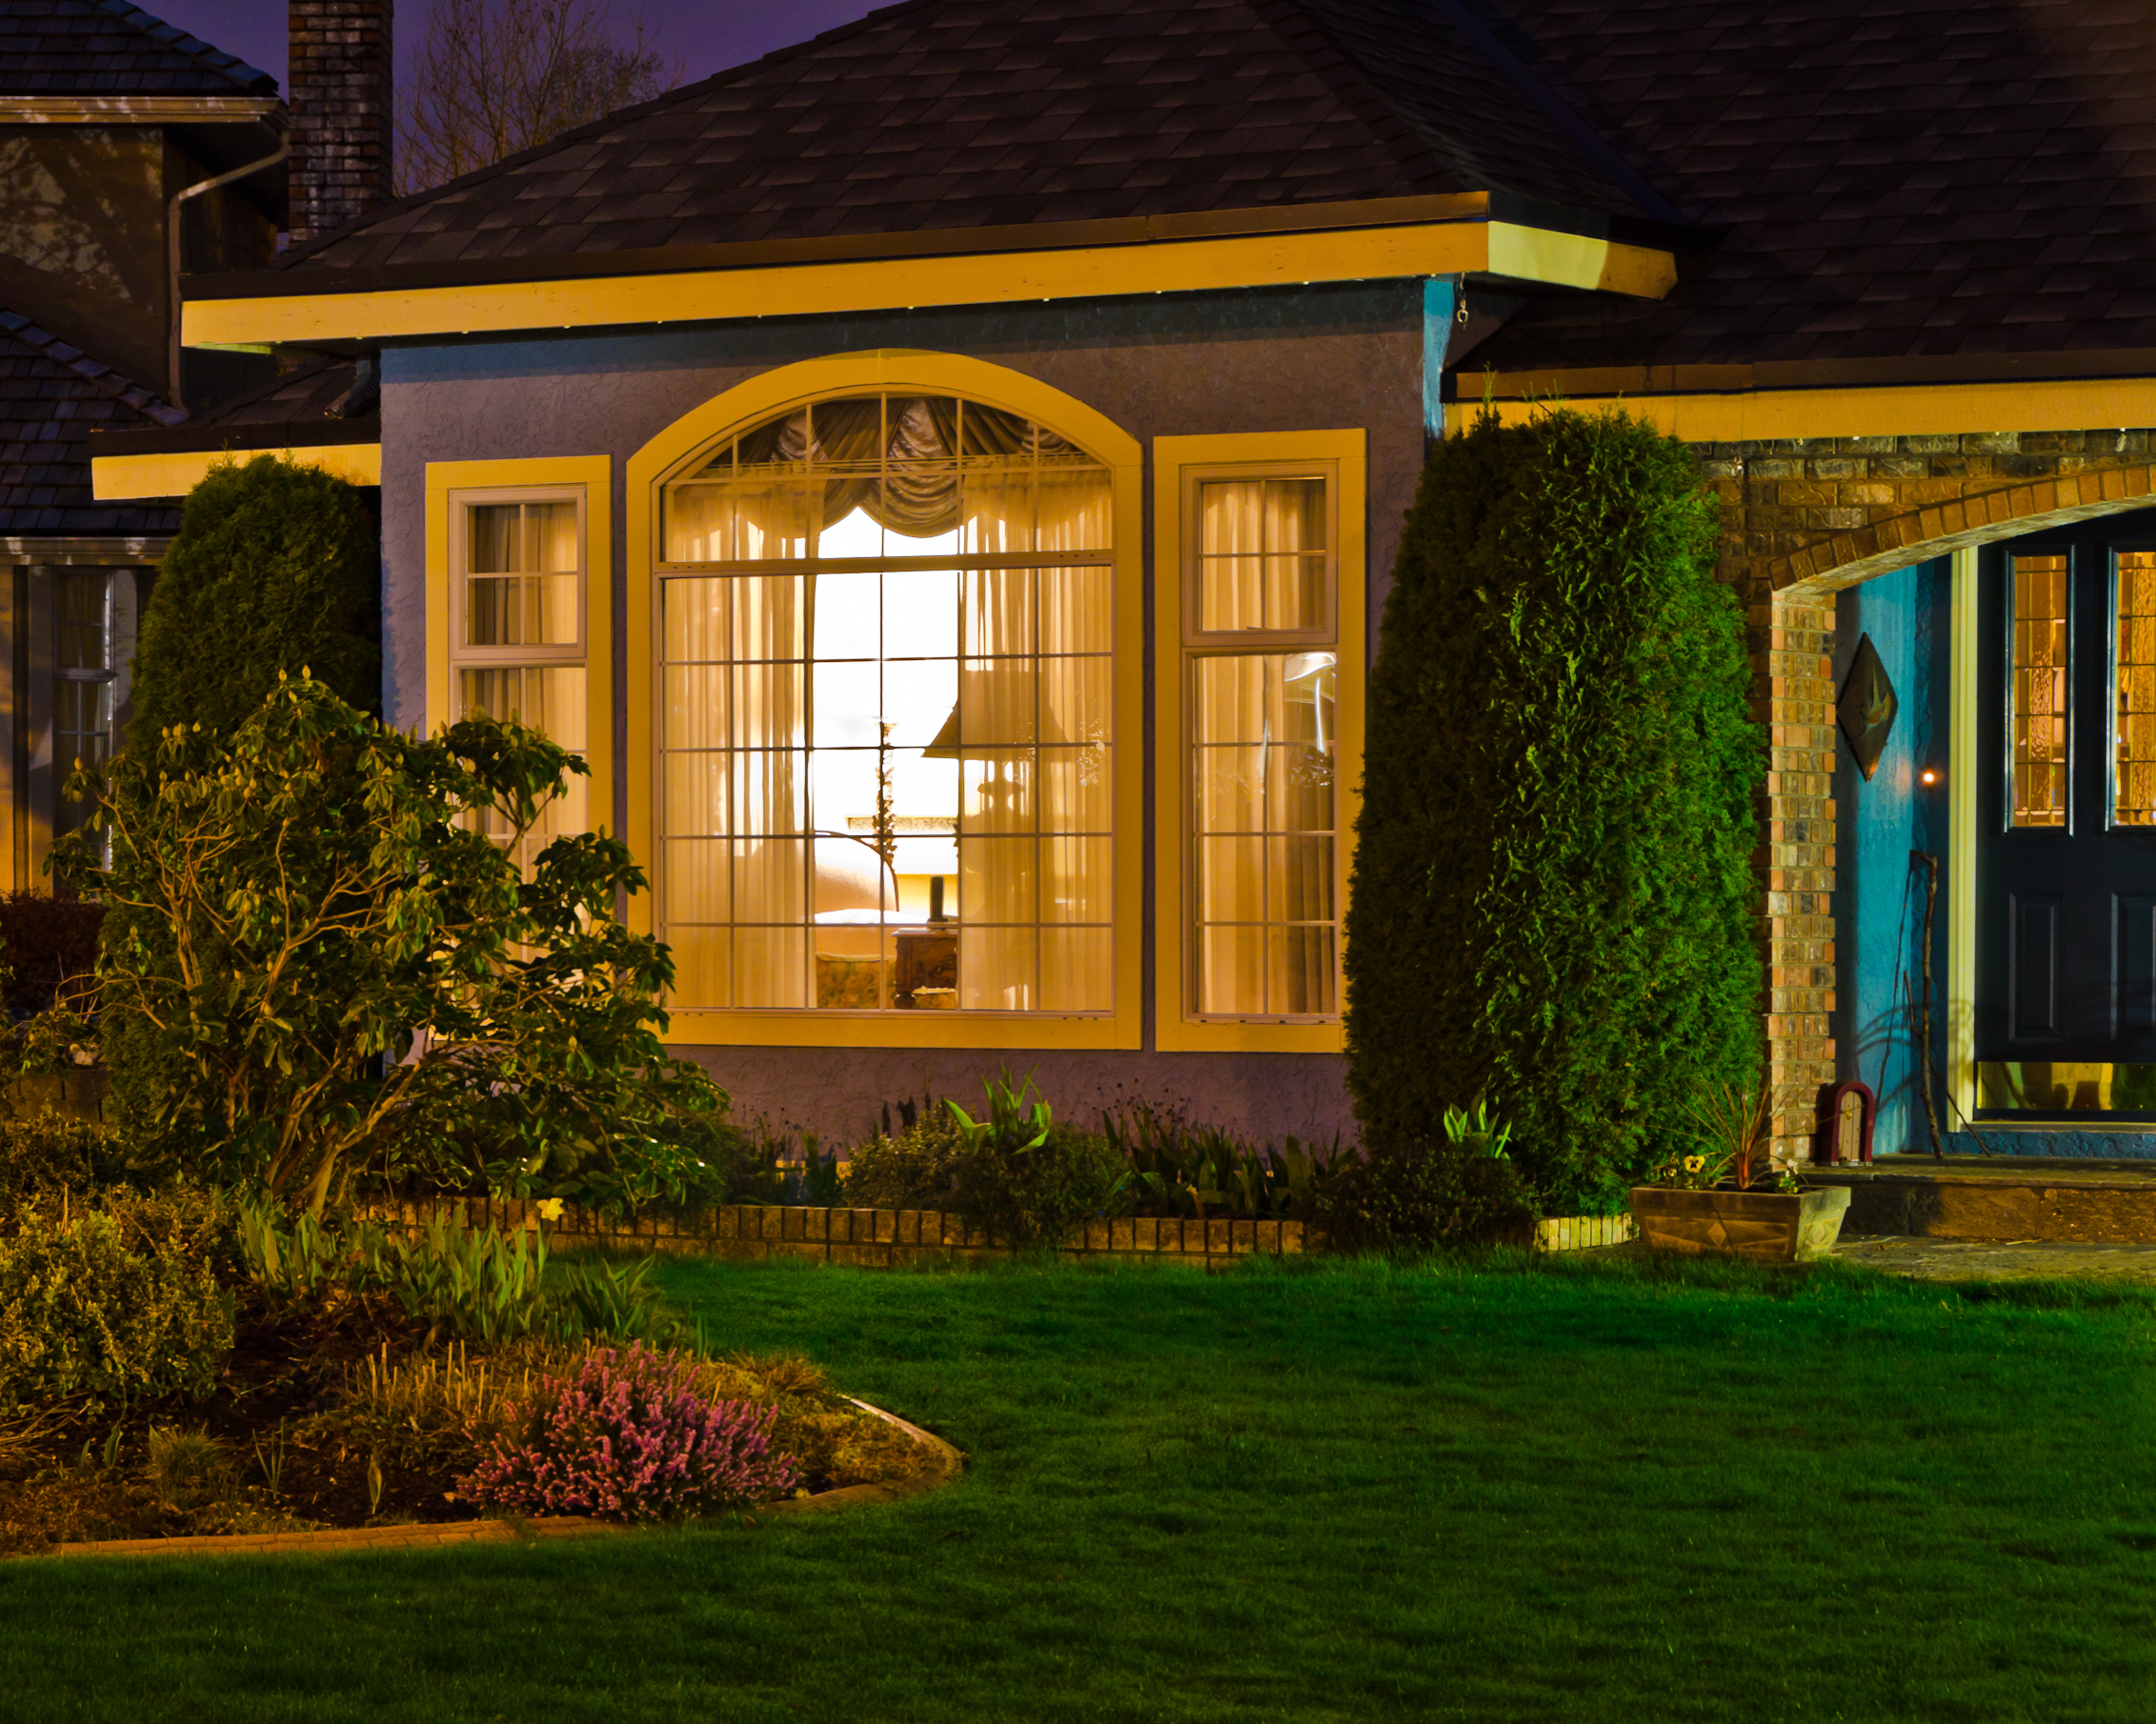 Entrance of a house at night | Source: Shutterstock